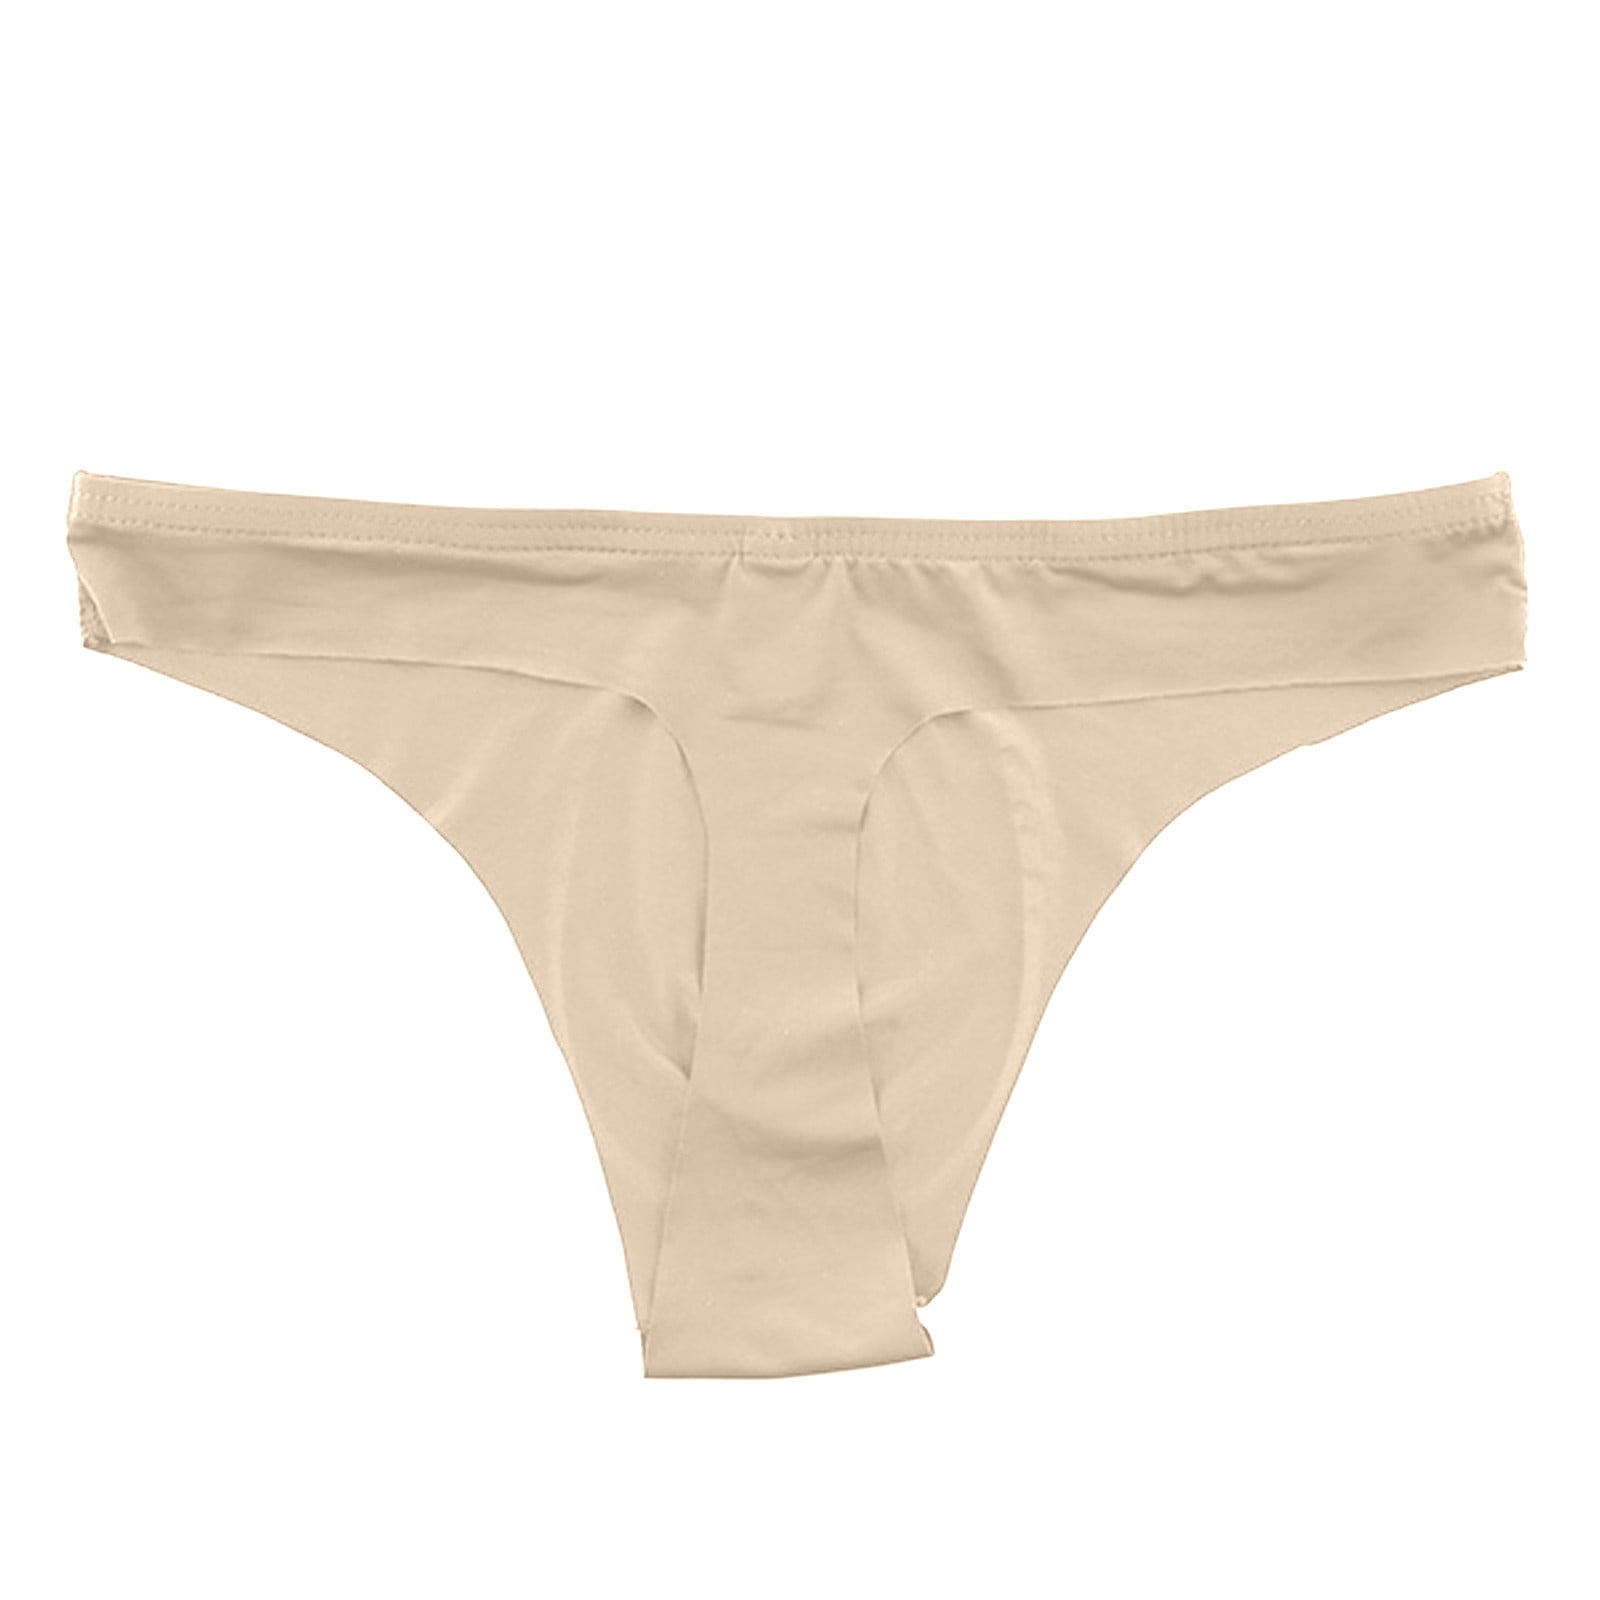 Glamour Boutique's Gaff Thong Underwear Male-to-Female Tucking